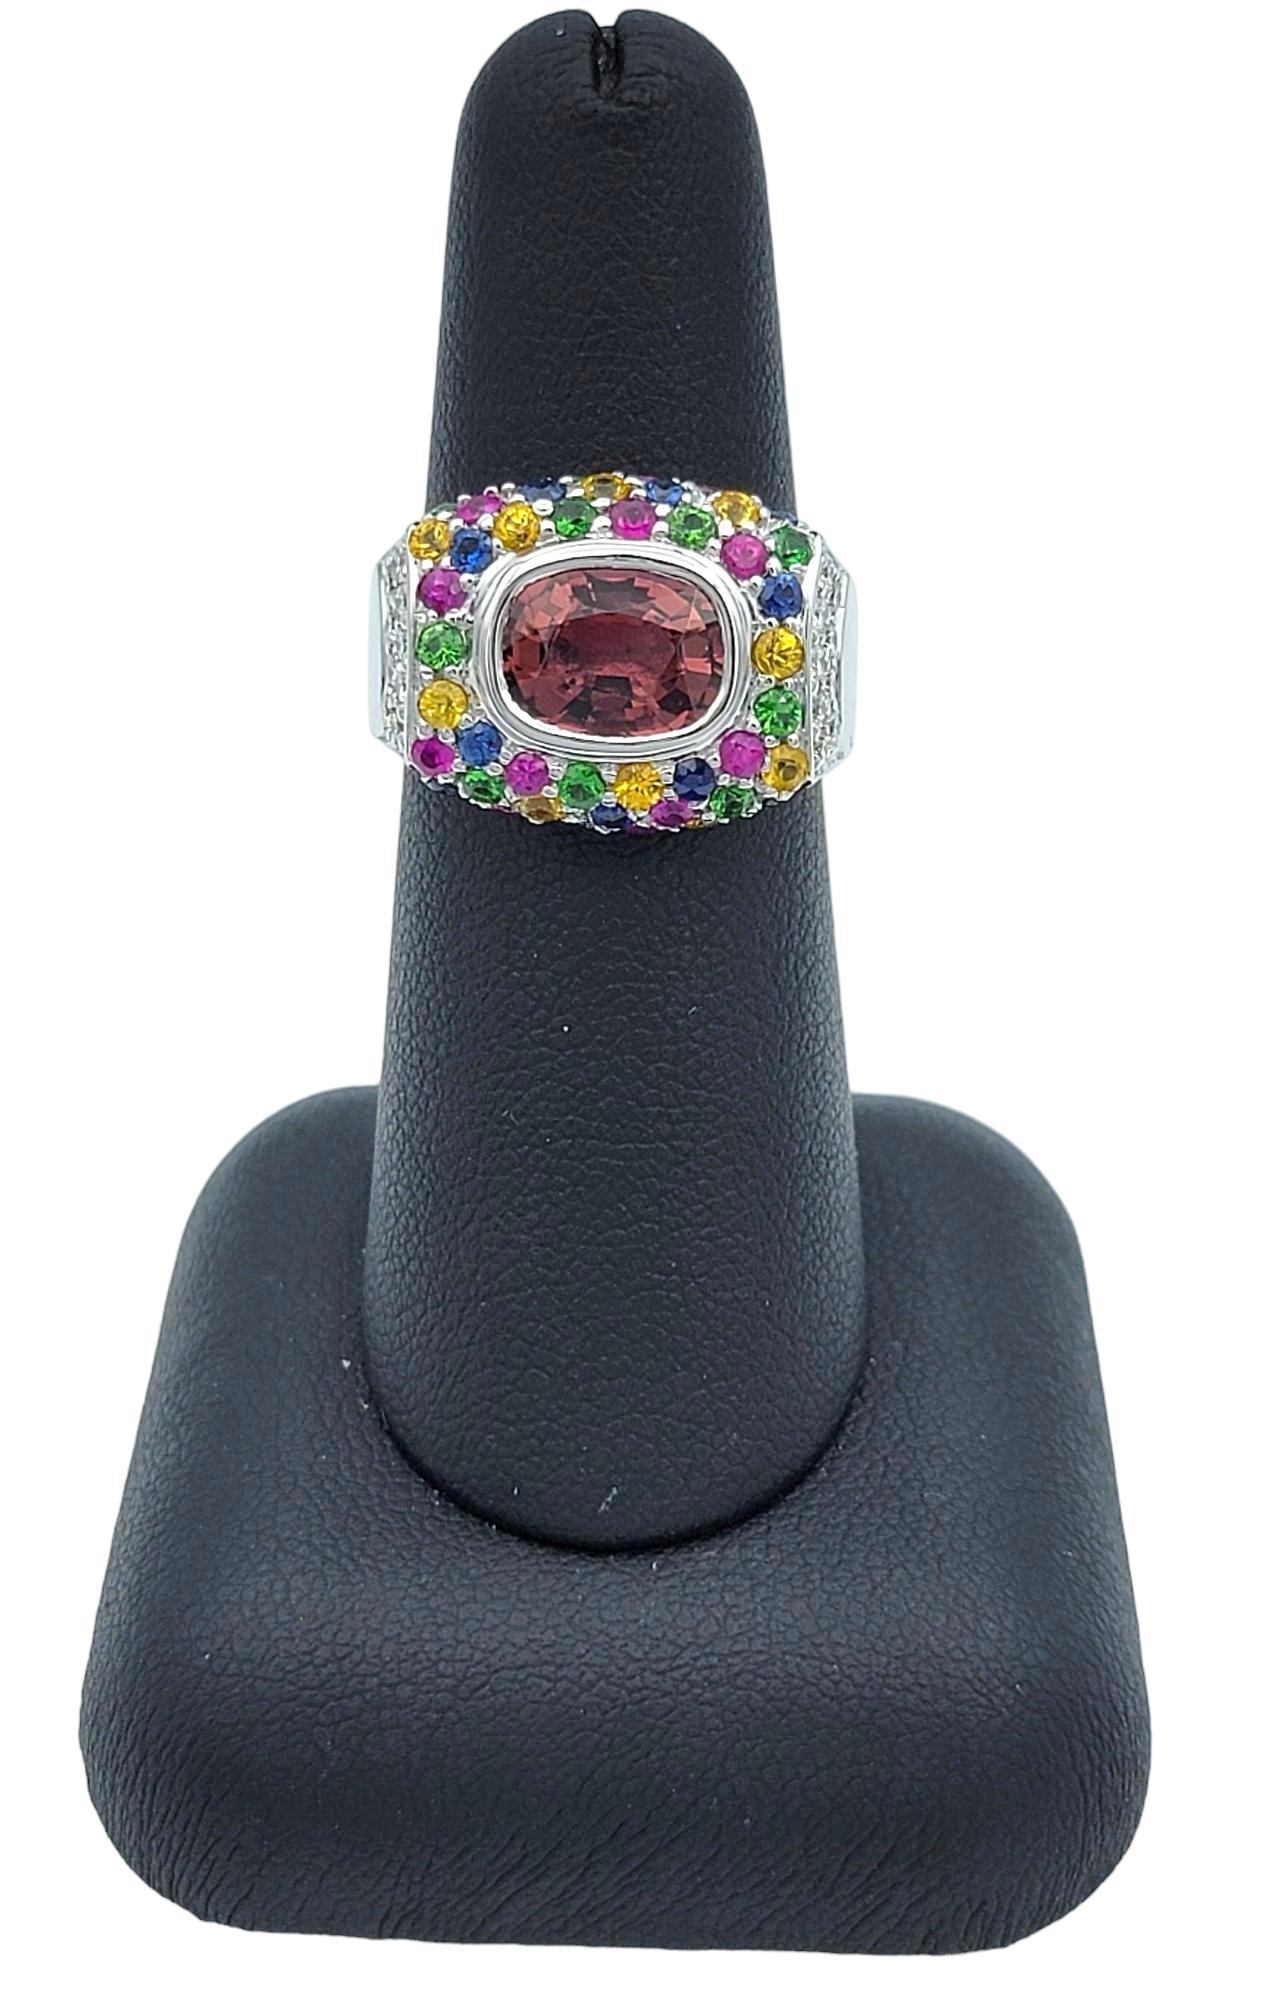 Sonia B. Multi-Colored Gemstone Squared Cocktail Ring Set in 18 Karat White Gold For Sale 5